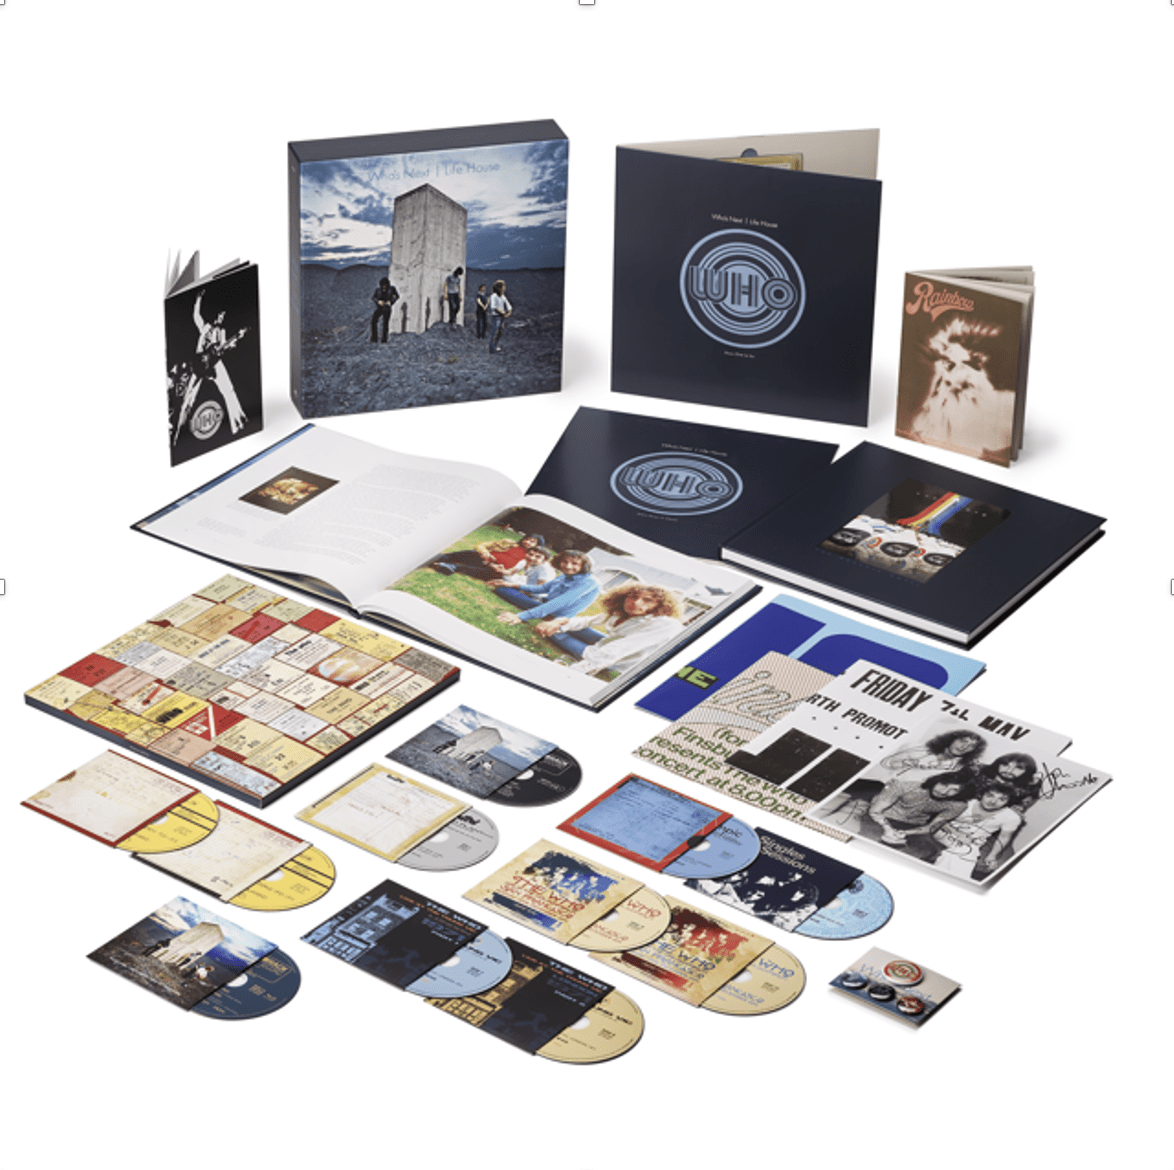 THE WHO’S DELUXE, MULTI-FORMAT RELEASE FOR WHO’S NEXT/LIFE HOUSE OUT NOW!